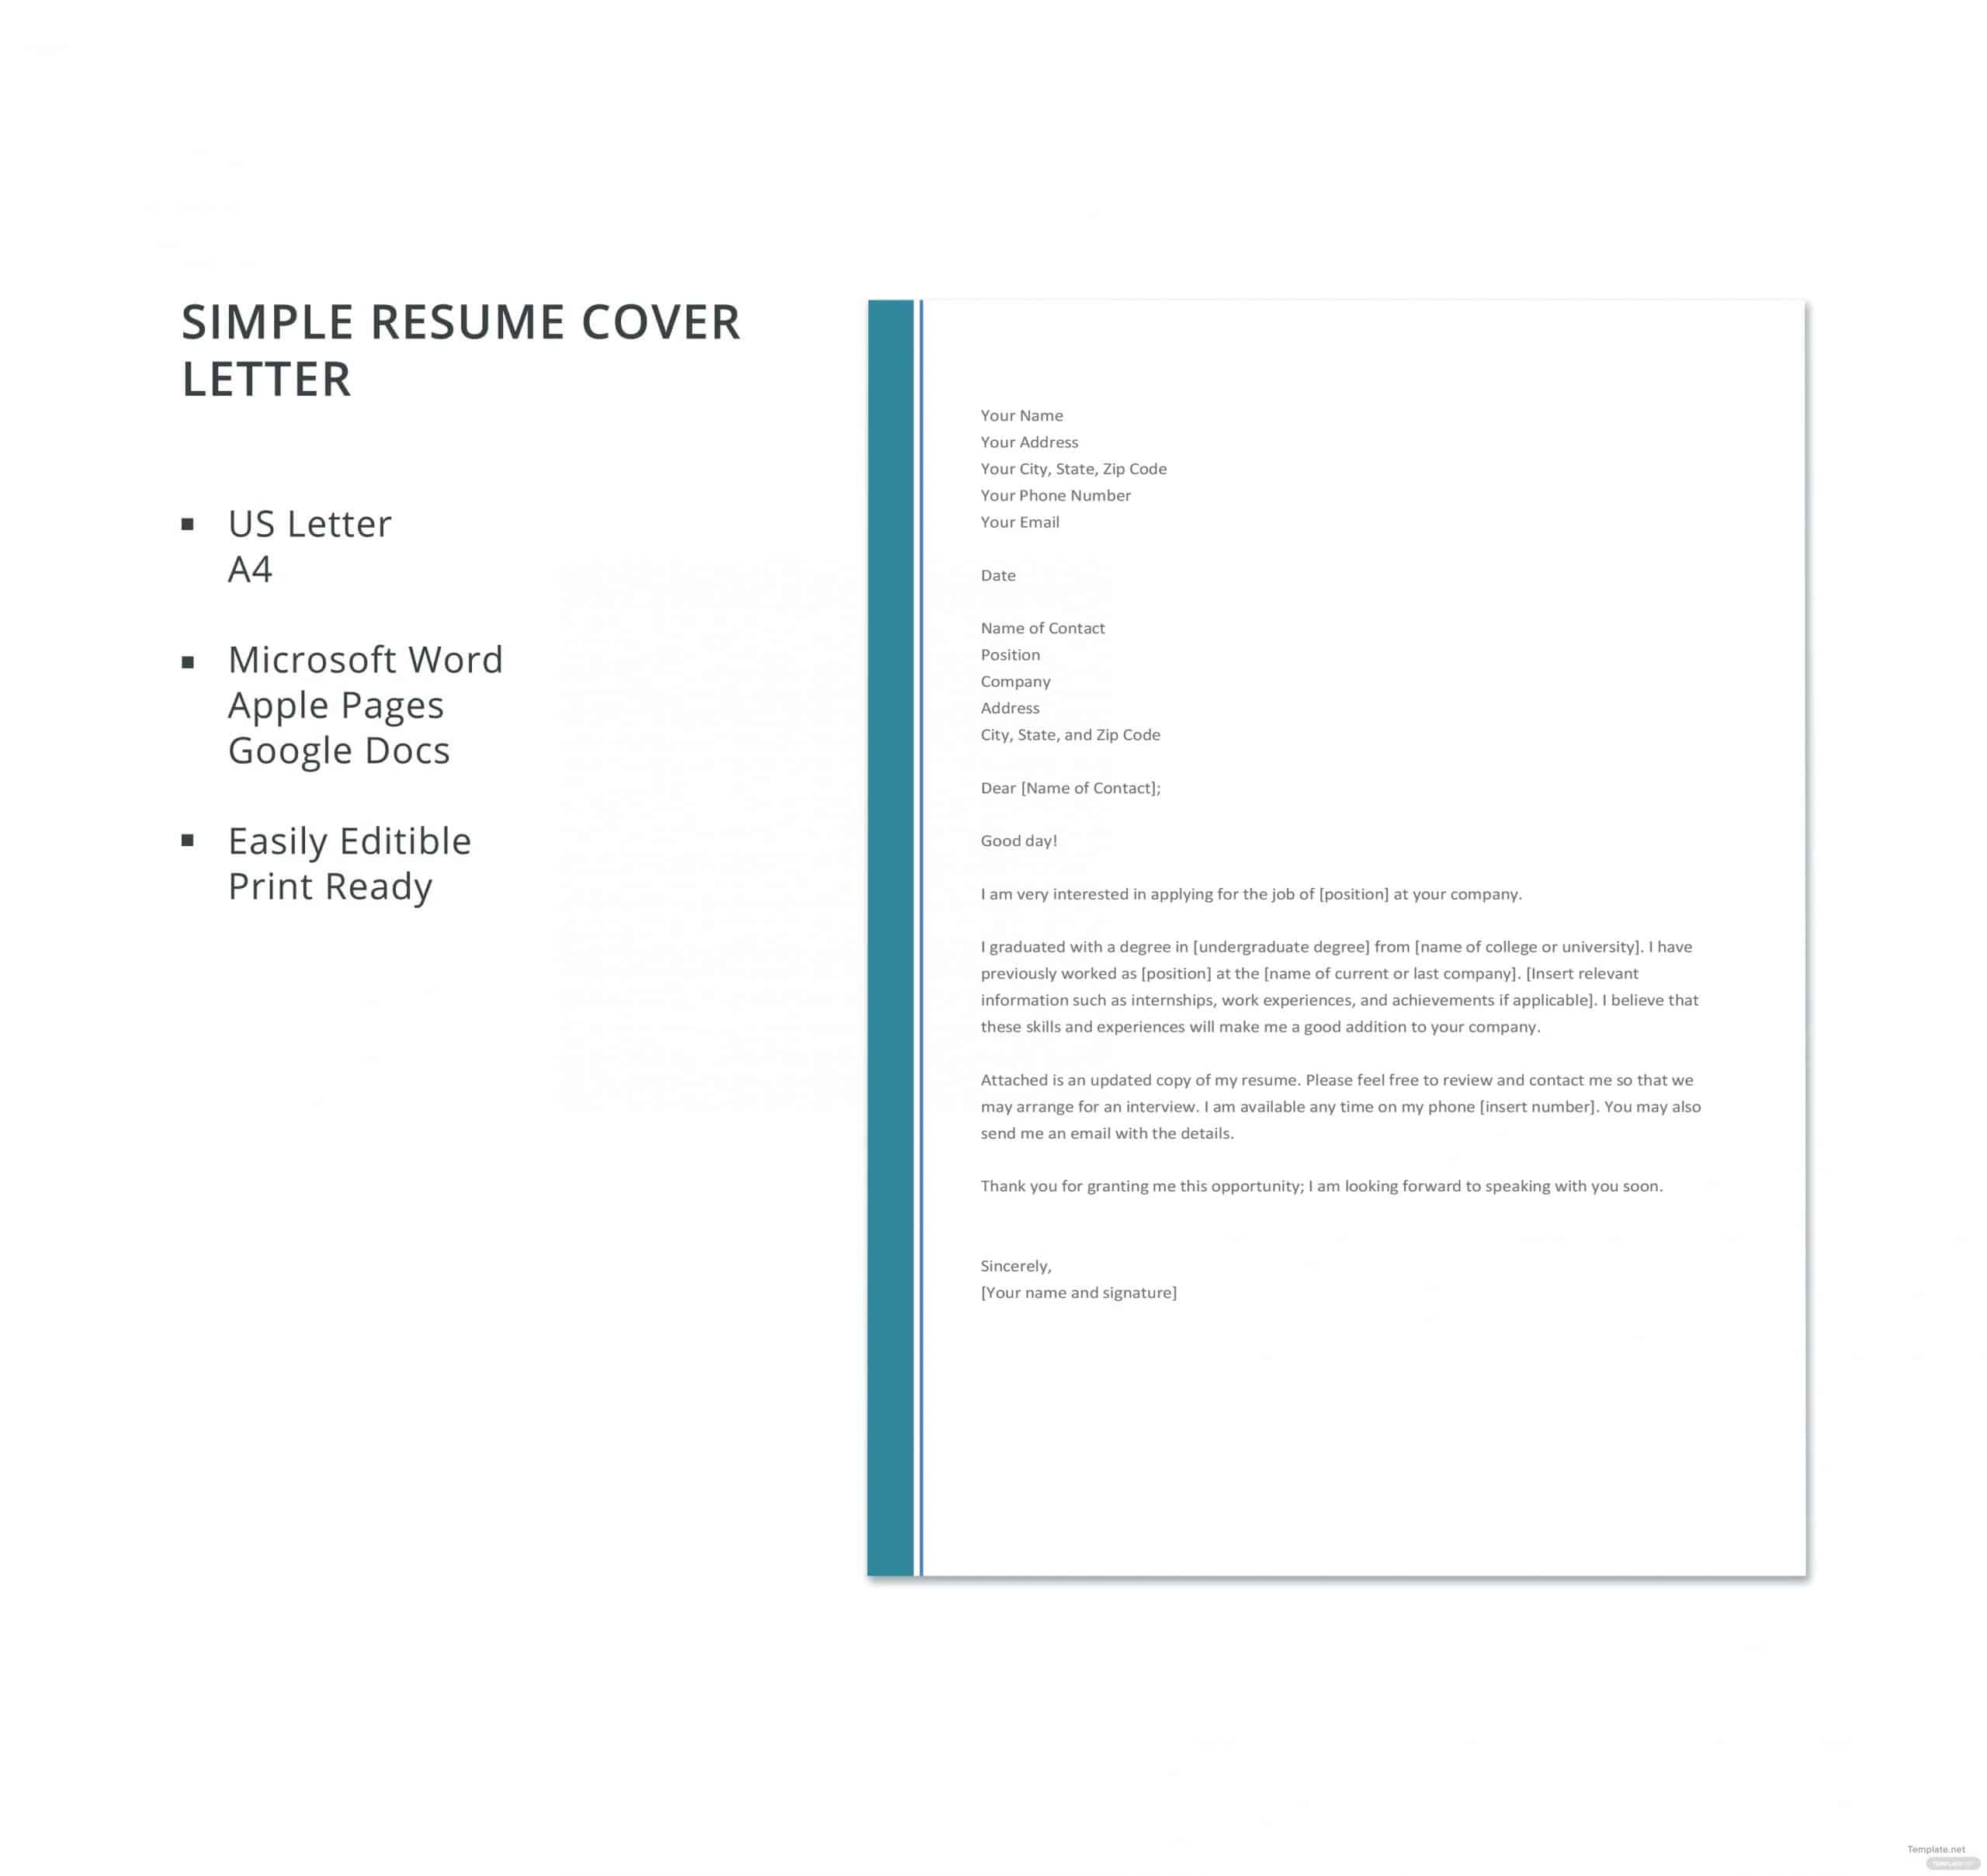 Free Simple Resume Cover Letter Template in Microsoft Word, Apple Pages, Google Docs